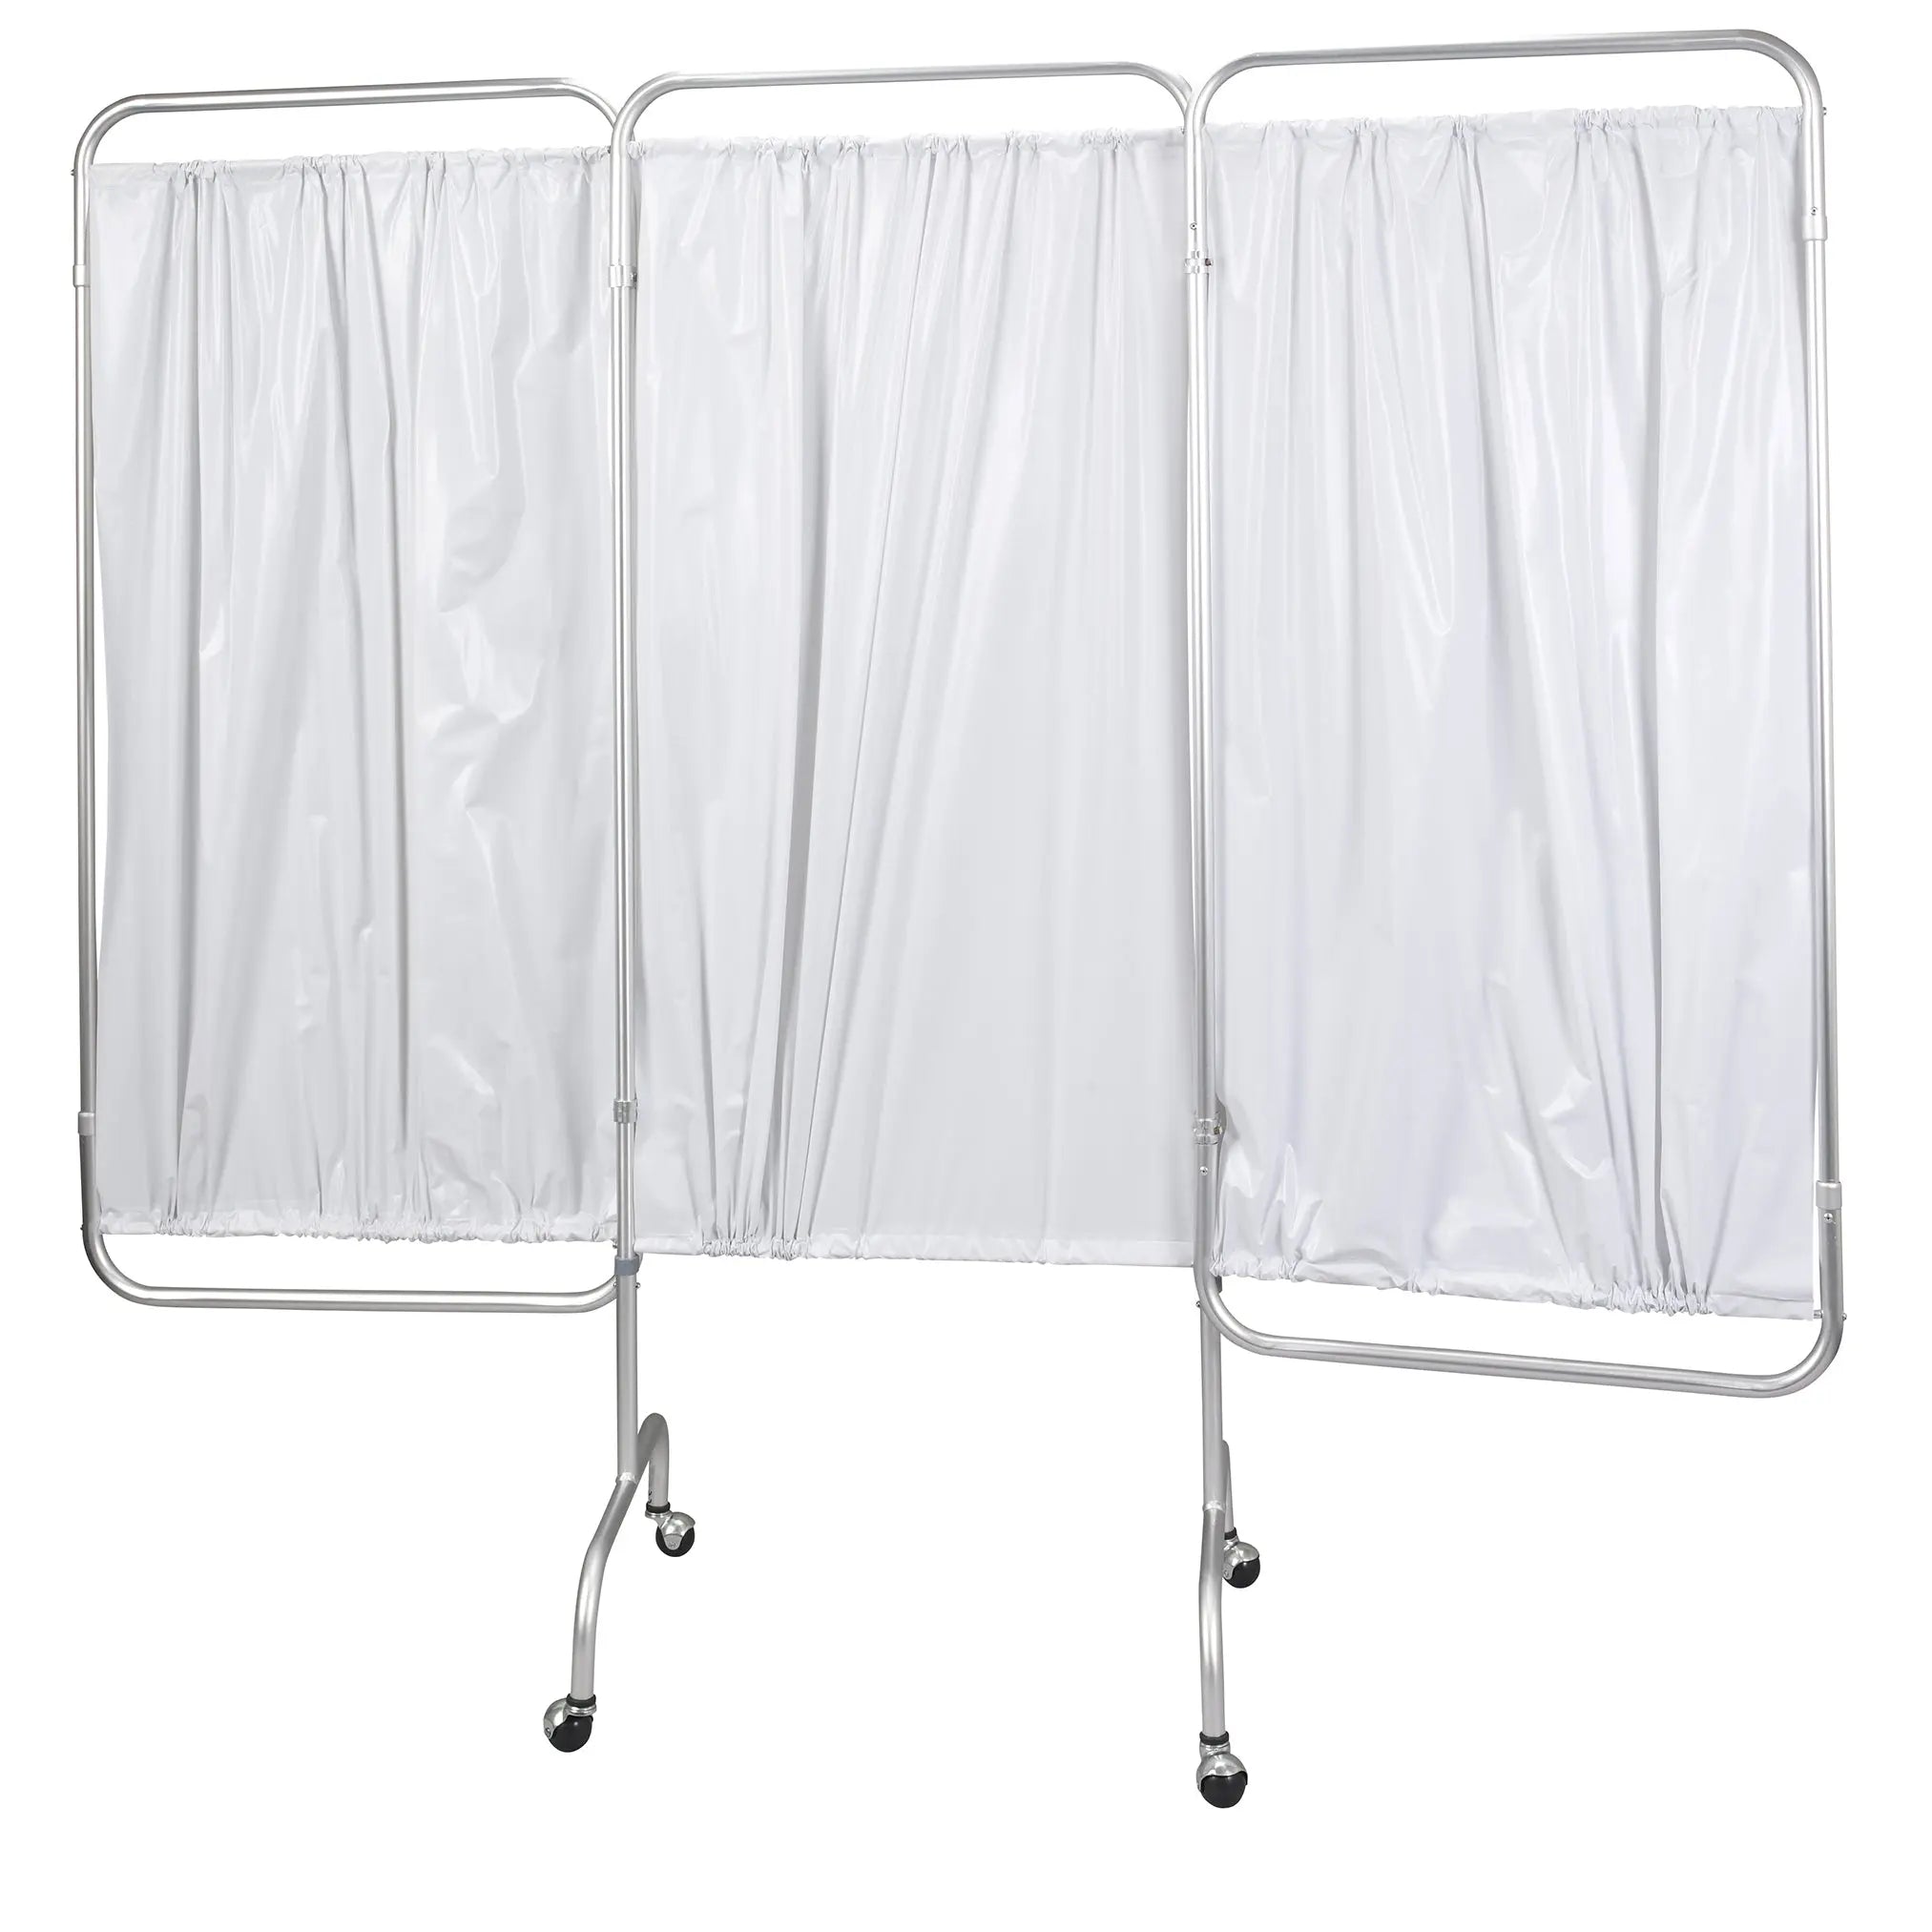 3 Panel Privacy Screen - Home Health Store Inc